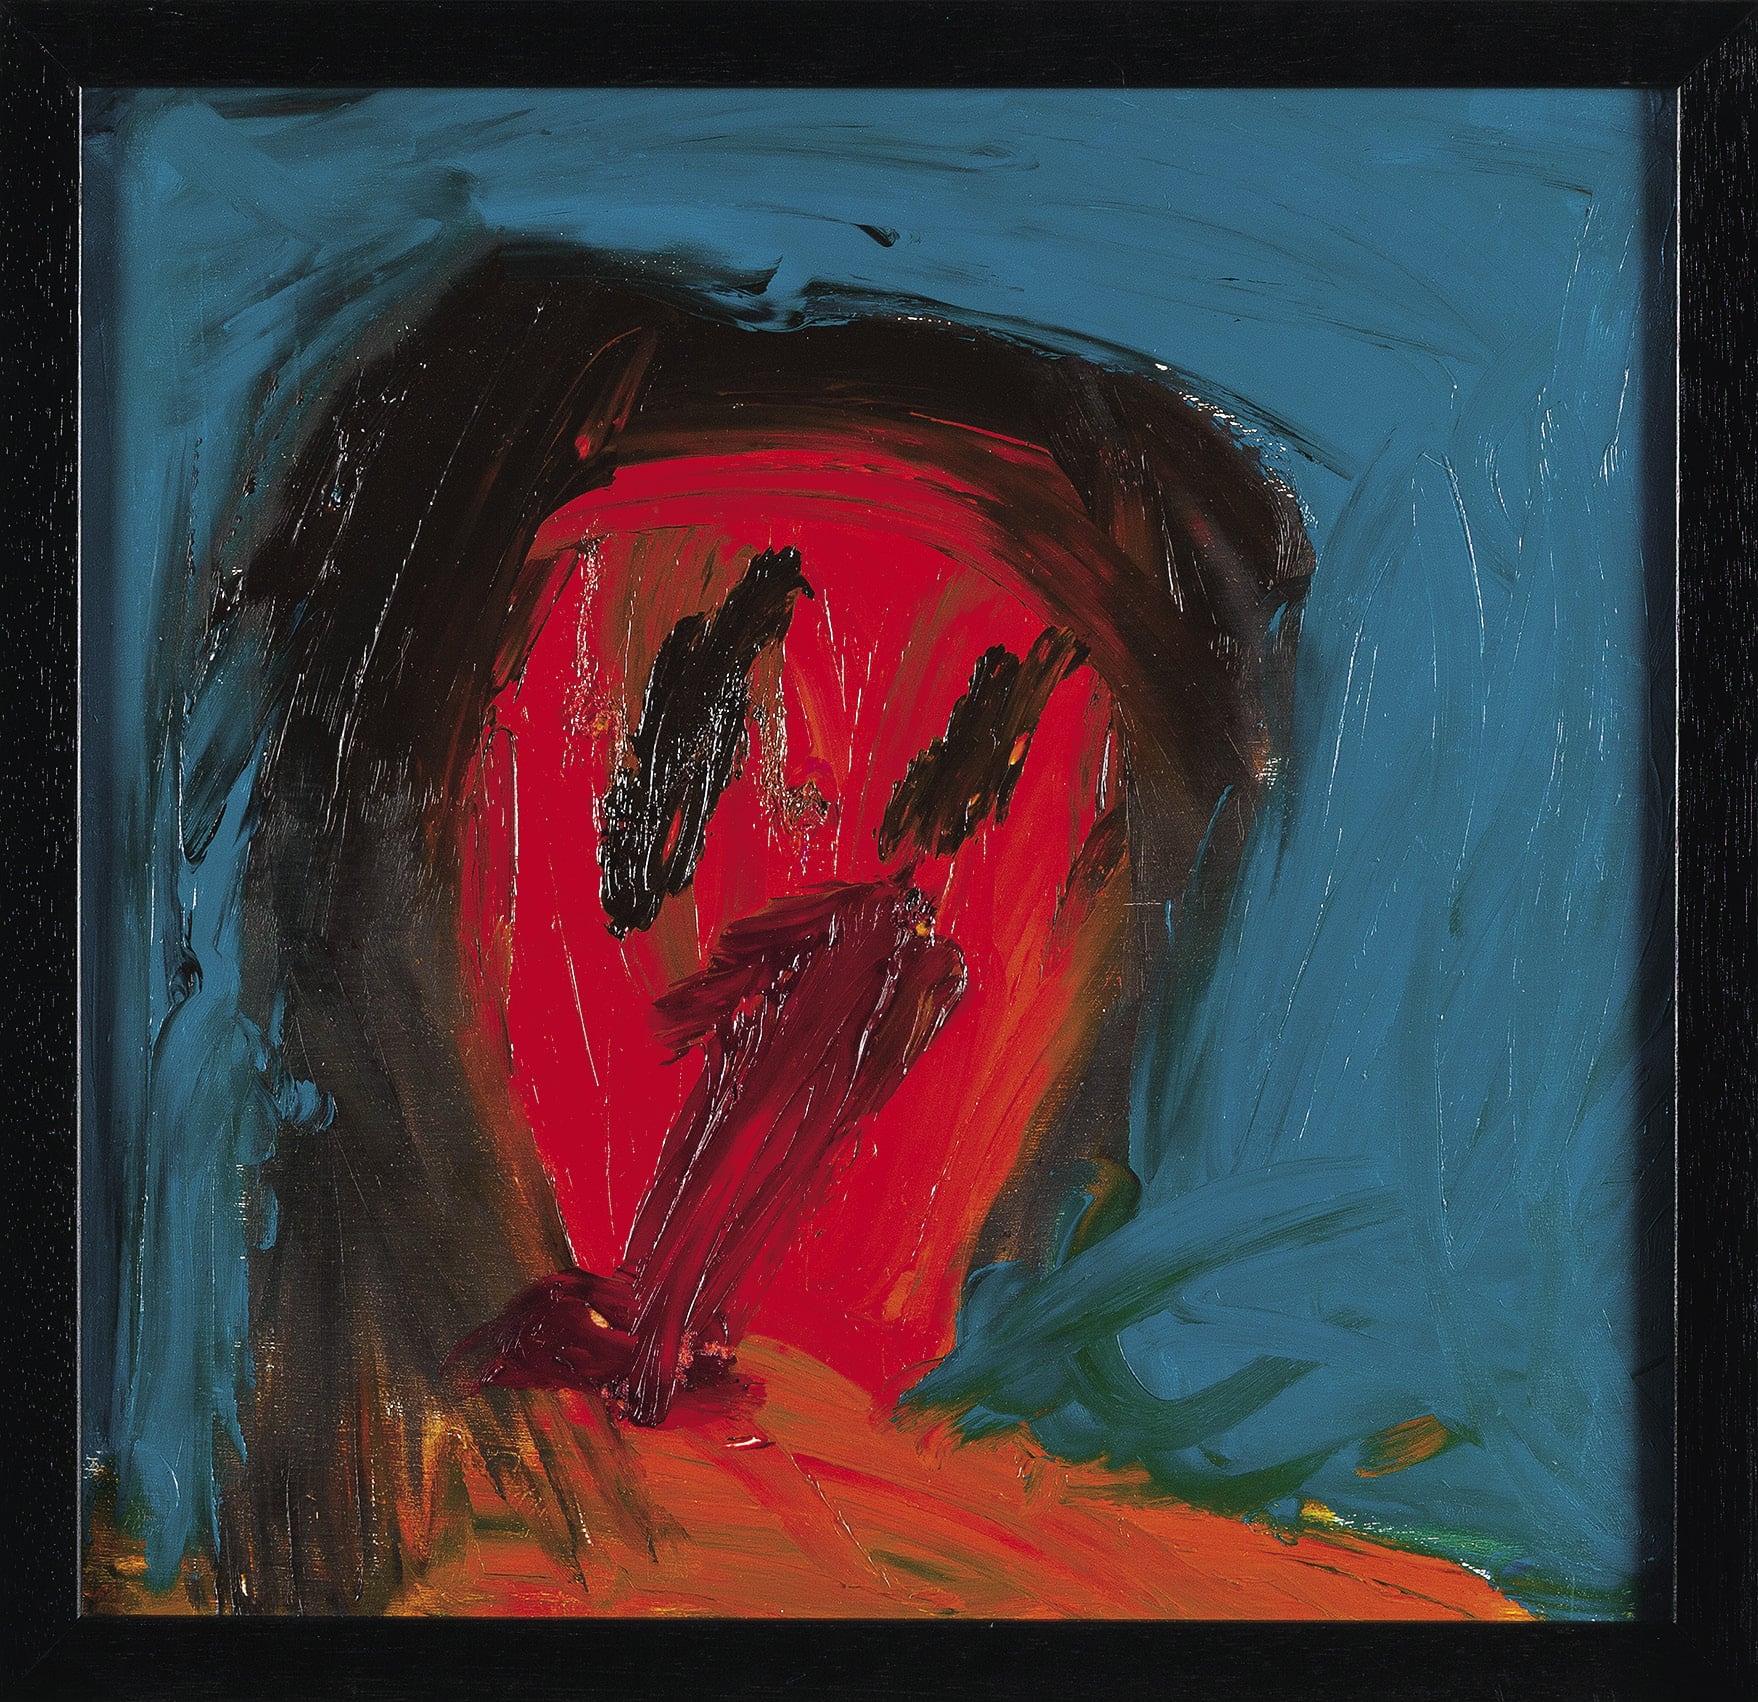 <em>*Secret Phases of Fear*</em> 2005, oil on board, from a series of 24 works, 39.2 × 38.6 cm each. Artbank collection, purchased 2015 as part of the NSW Arts and Disability Partnership, supported by the NSW Department of Family and Community Services and Arts NSW